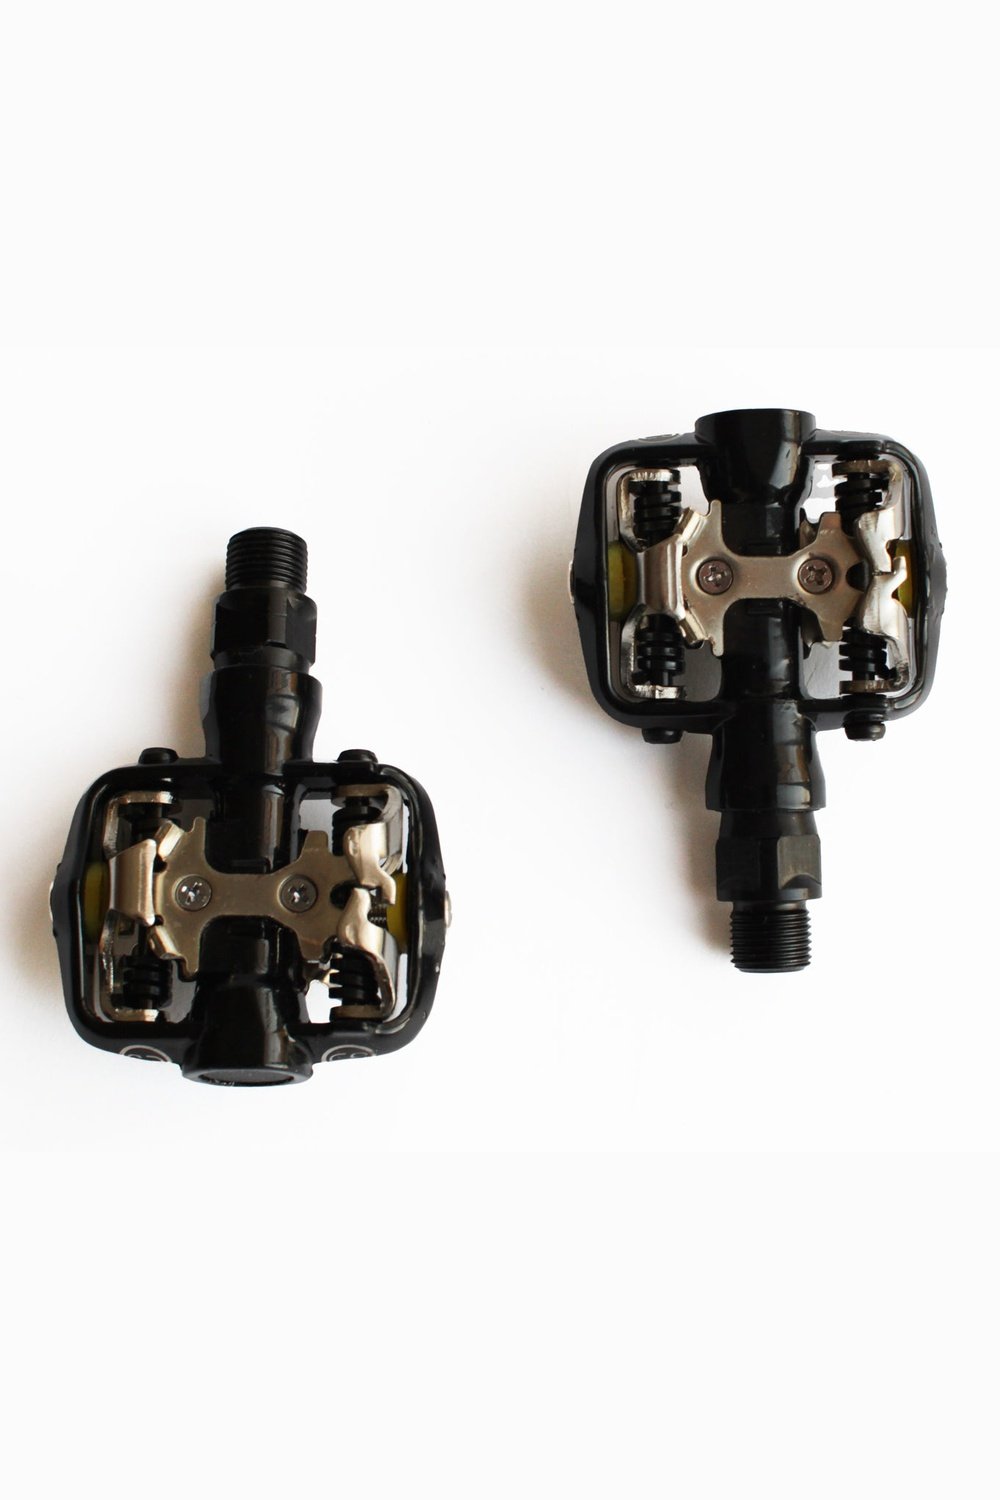 Sundried MTB Performance SPD XC Pedals S-P4 Pedals SD0376 Activewear